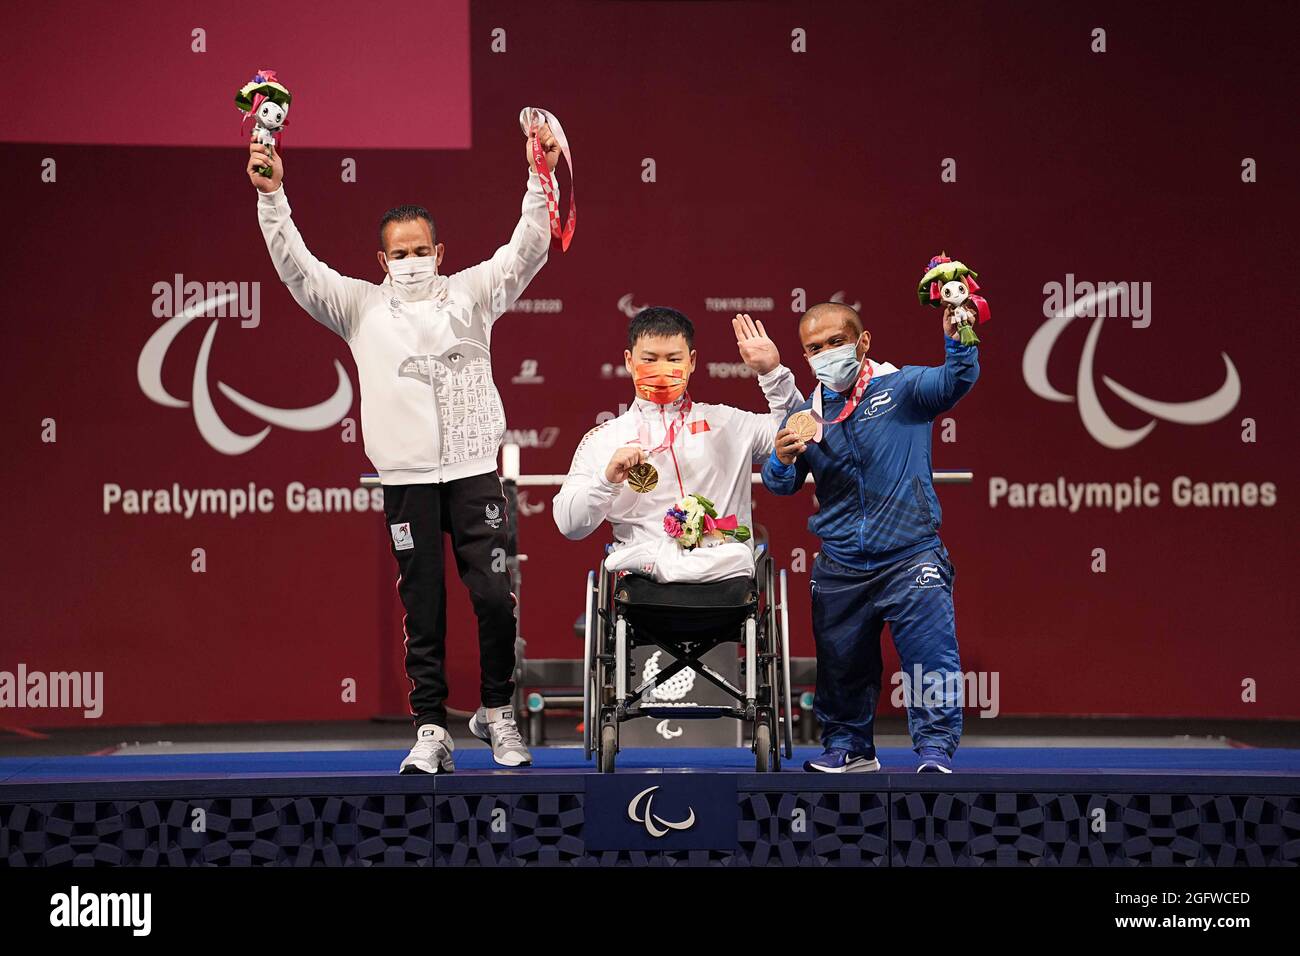 Tokyo, Japan. 27th Aug, 2021. Silver medalist Osman Sherif (L) of Egypt, gold medalist Qi Yongkai (C) of China and bronze medalist Herbert Aceituno of El Salvador pose for photos during the awarding ceremony of the men's 59kg final of powerlifting event at the Tokyo 2020 Paralympic Games in Tokyo, Japan, Aug. 27, 2021. Credit: Xiong Qi/Xinhua/Alamy Live News Stock Photo